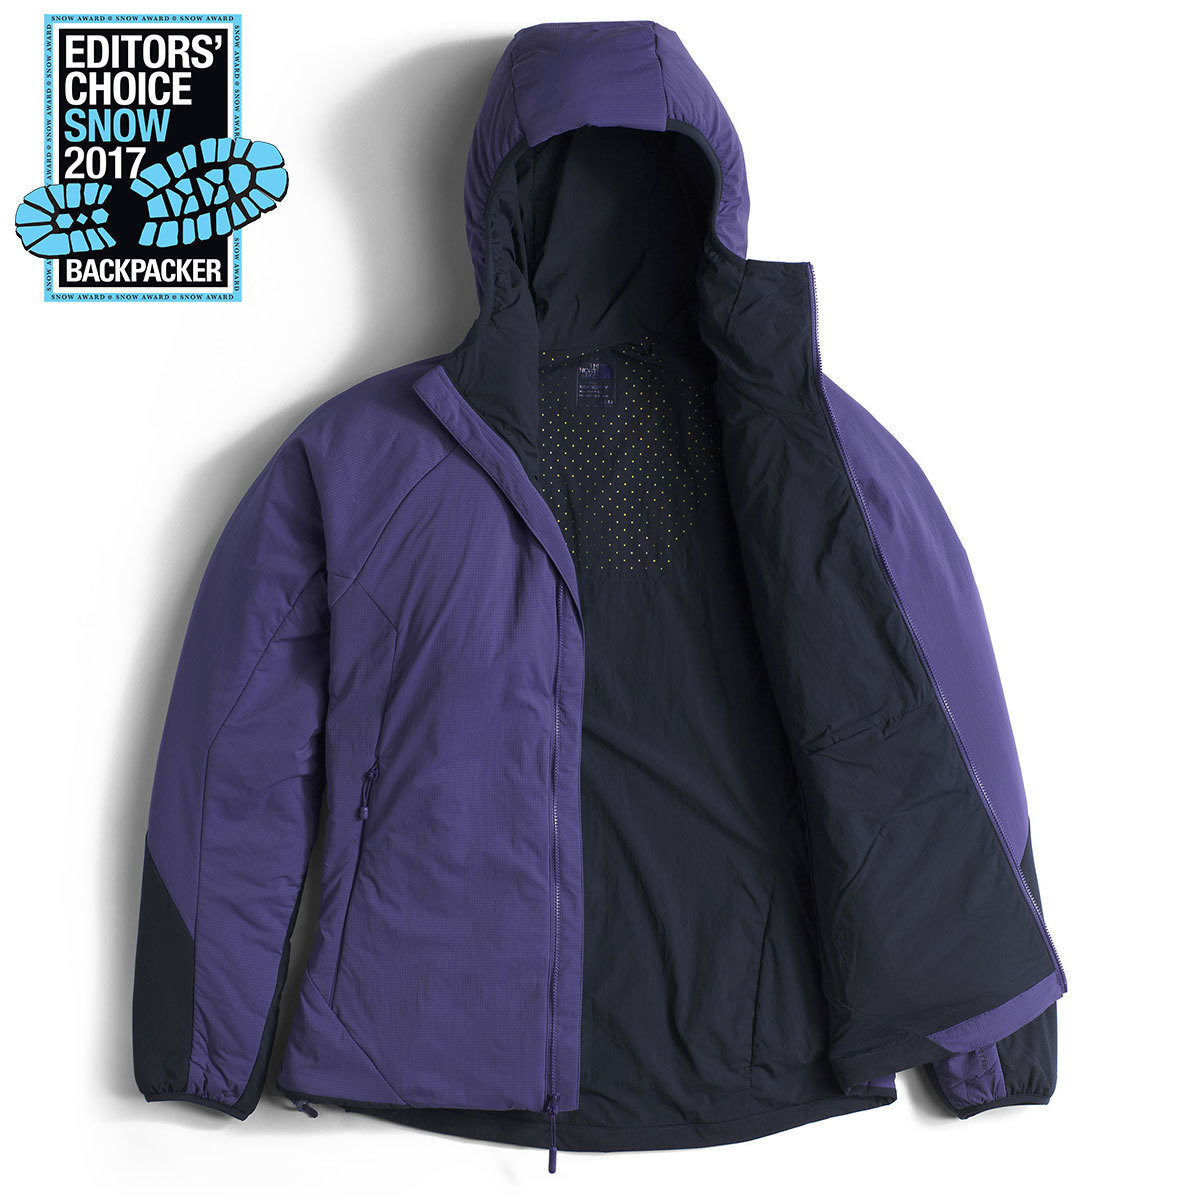 north face ventrix hoodie womens